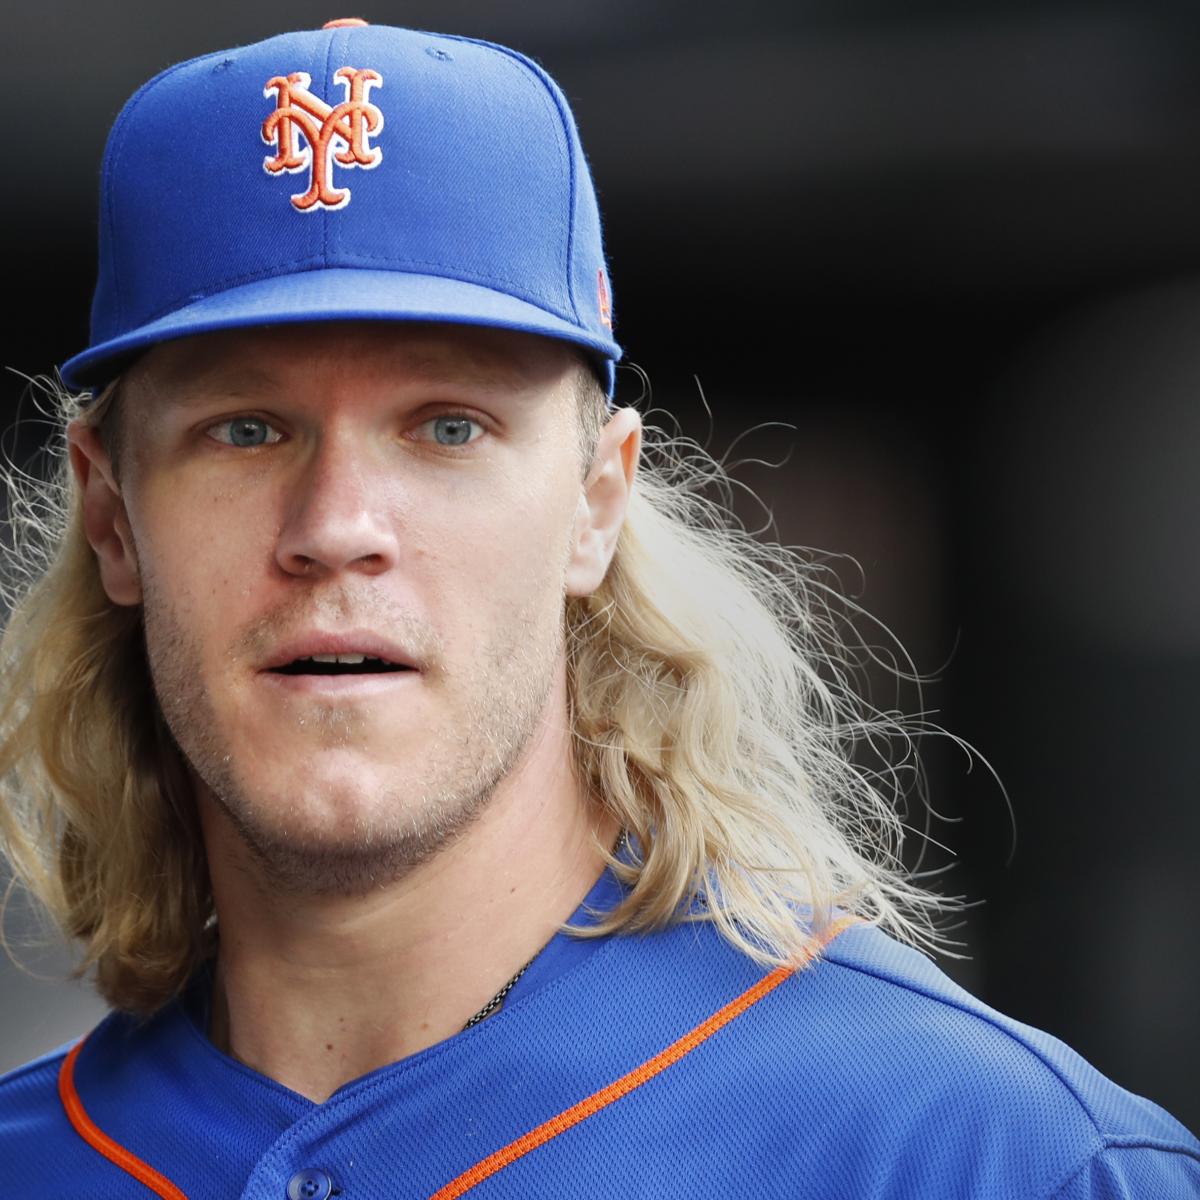 Who has the best Mets Hair: Syndergaard, deGrom, or Gsellman? 